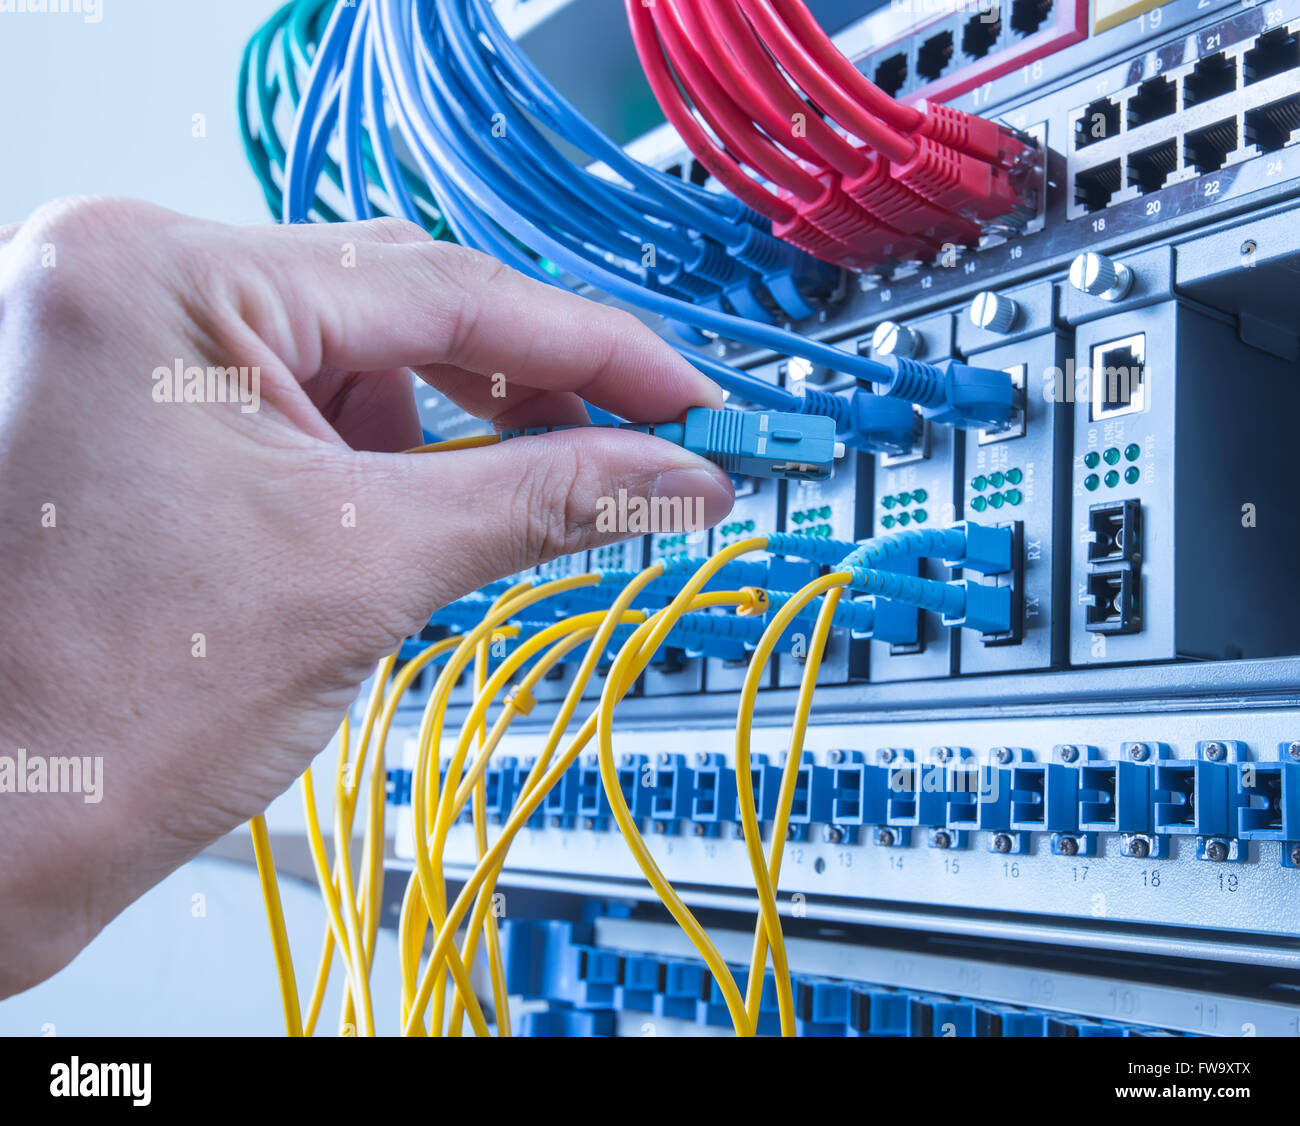 hand of administrator holding optic fiber cables with connectors Stock Photo